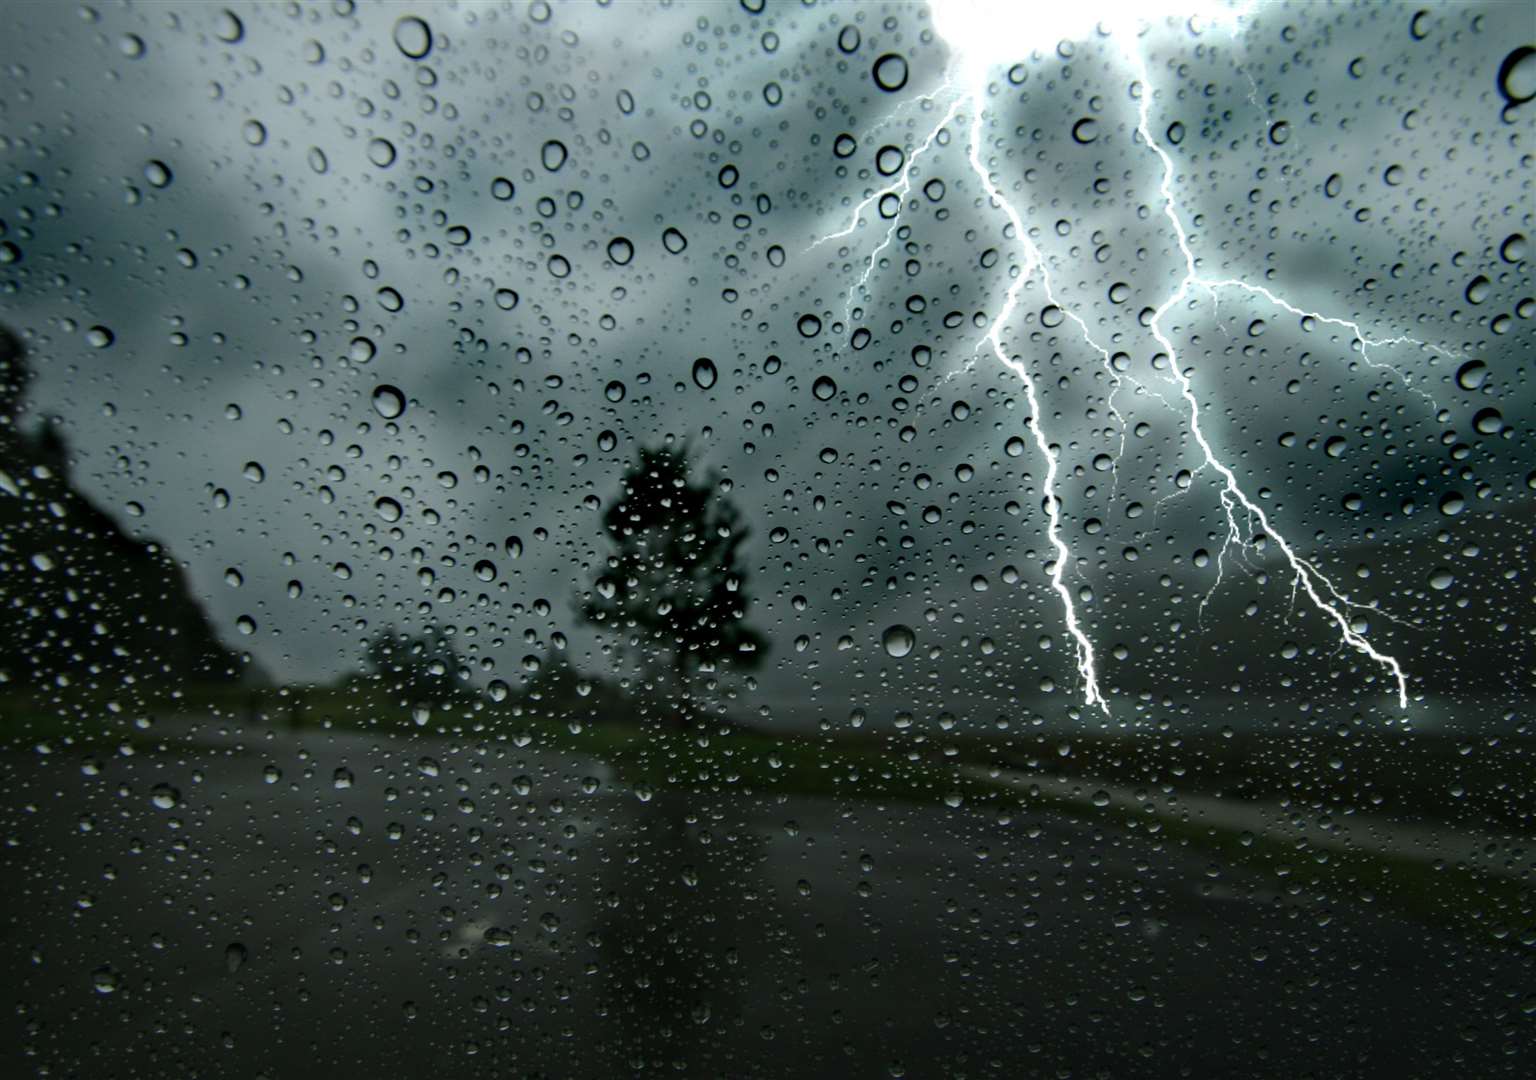 The Met Office has warned there are possible risks of thunderstorms